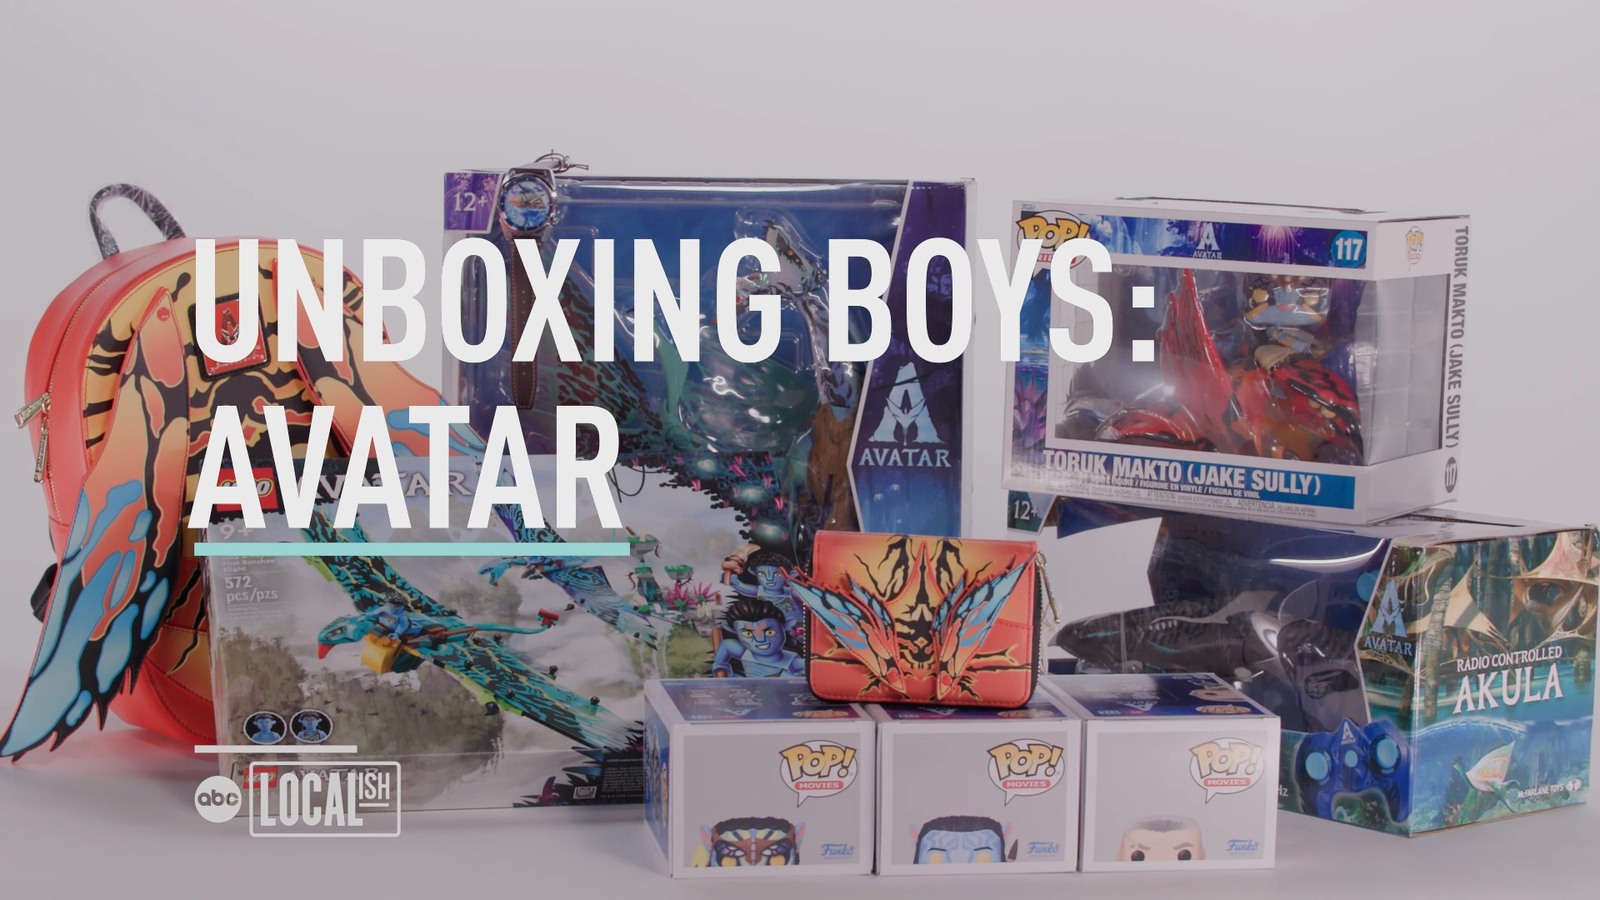 Avatar gifts for the holidays with the Unboxing Boys